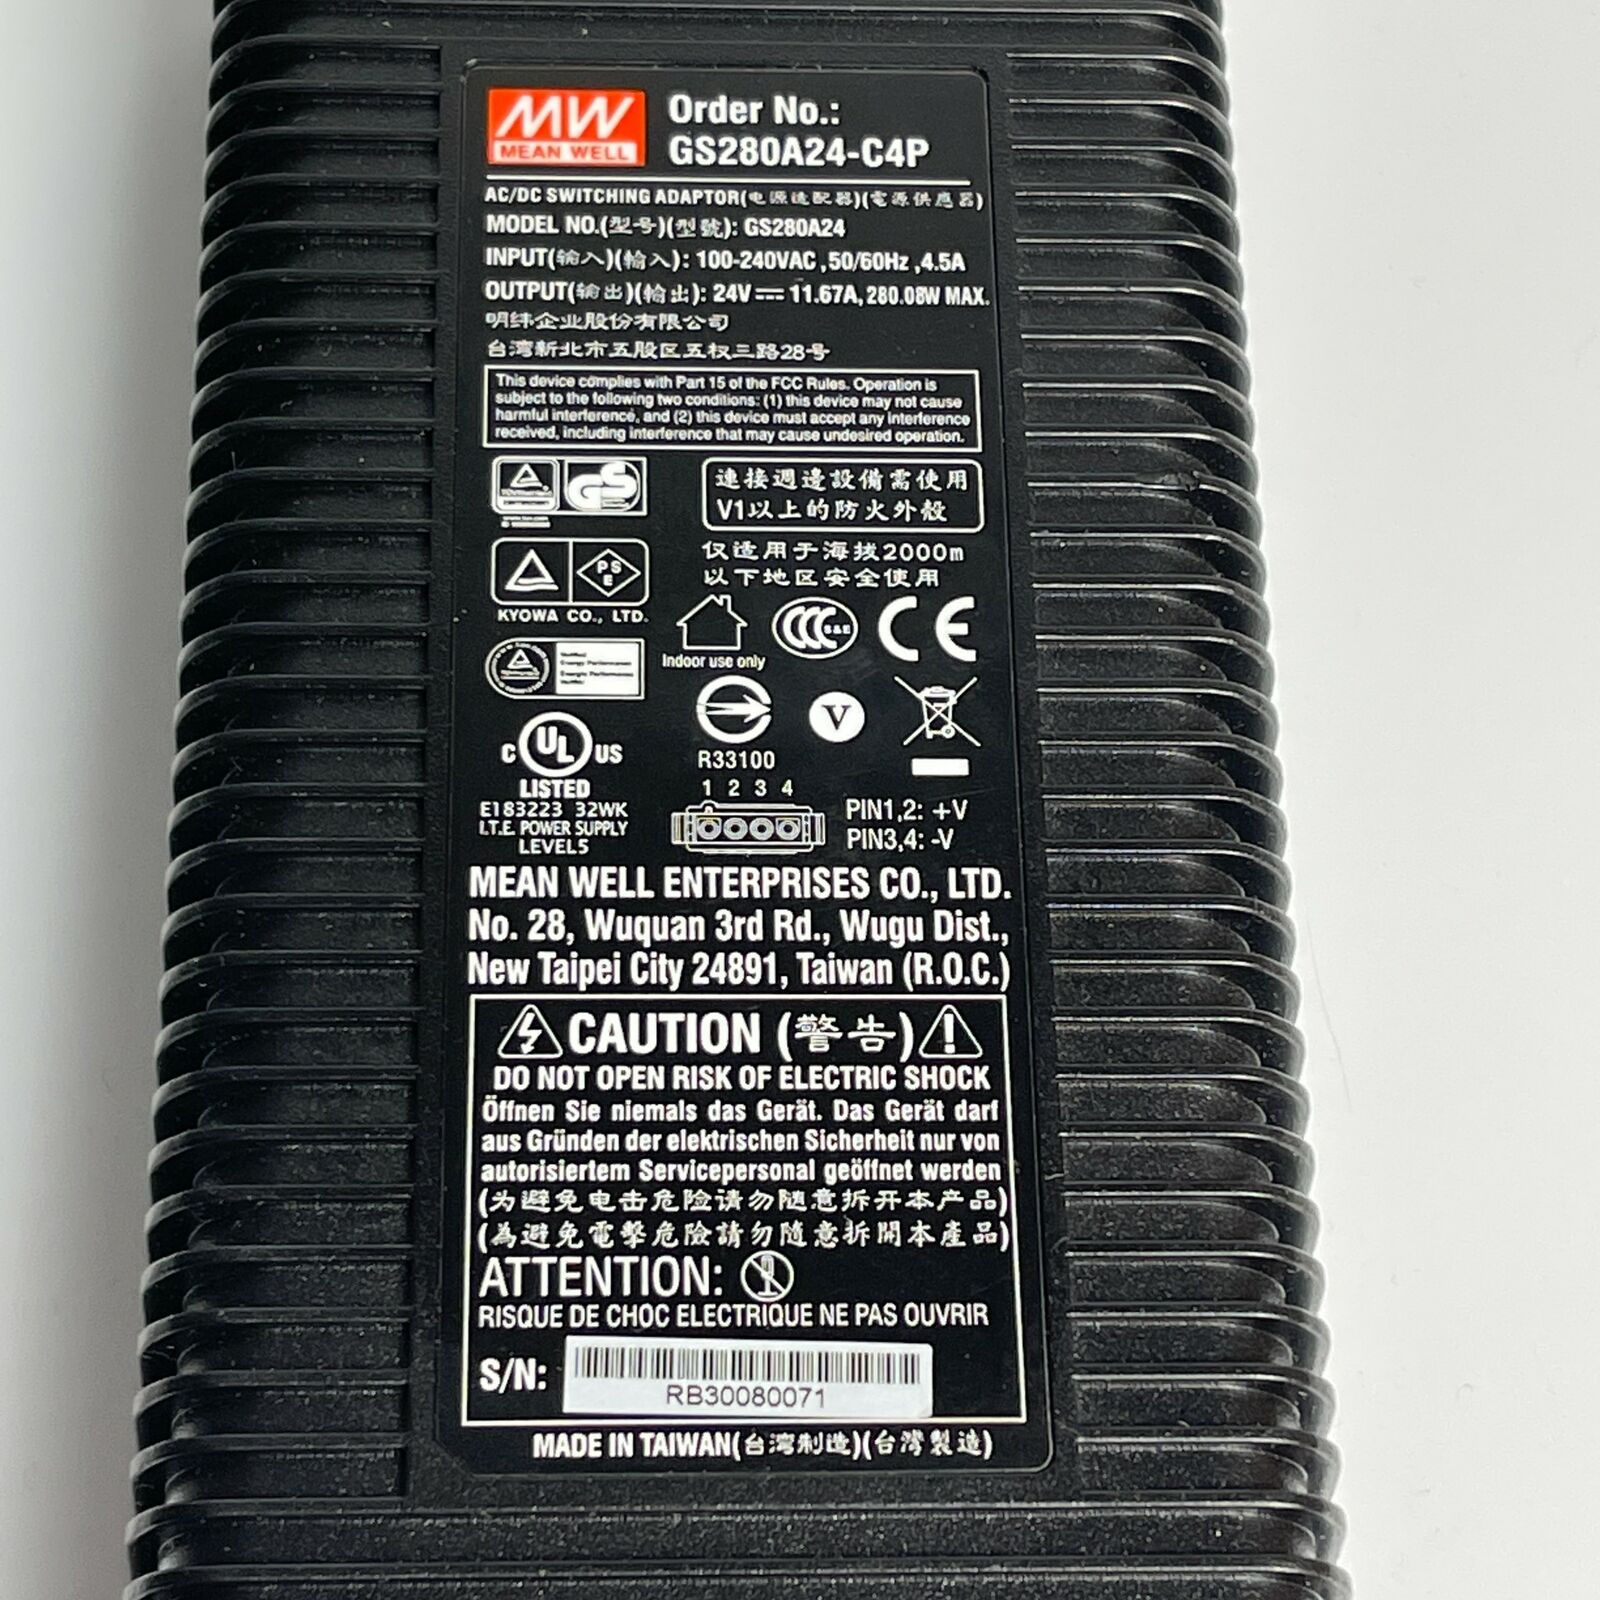 *Brand NEW*Mean Well GS280A24-C4P Black Portable 280.08W AC/DC Switching Power Adapter - Click Image to Close